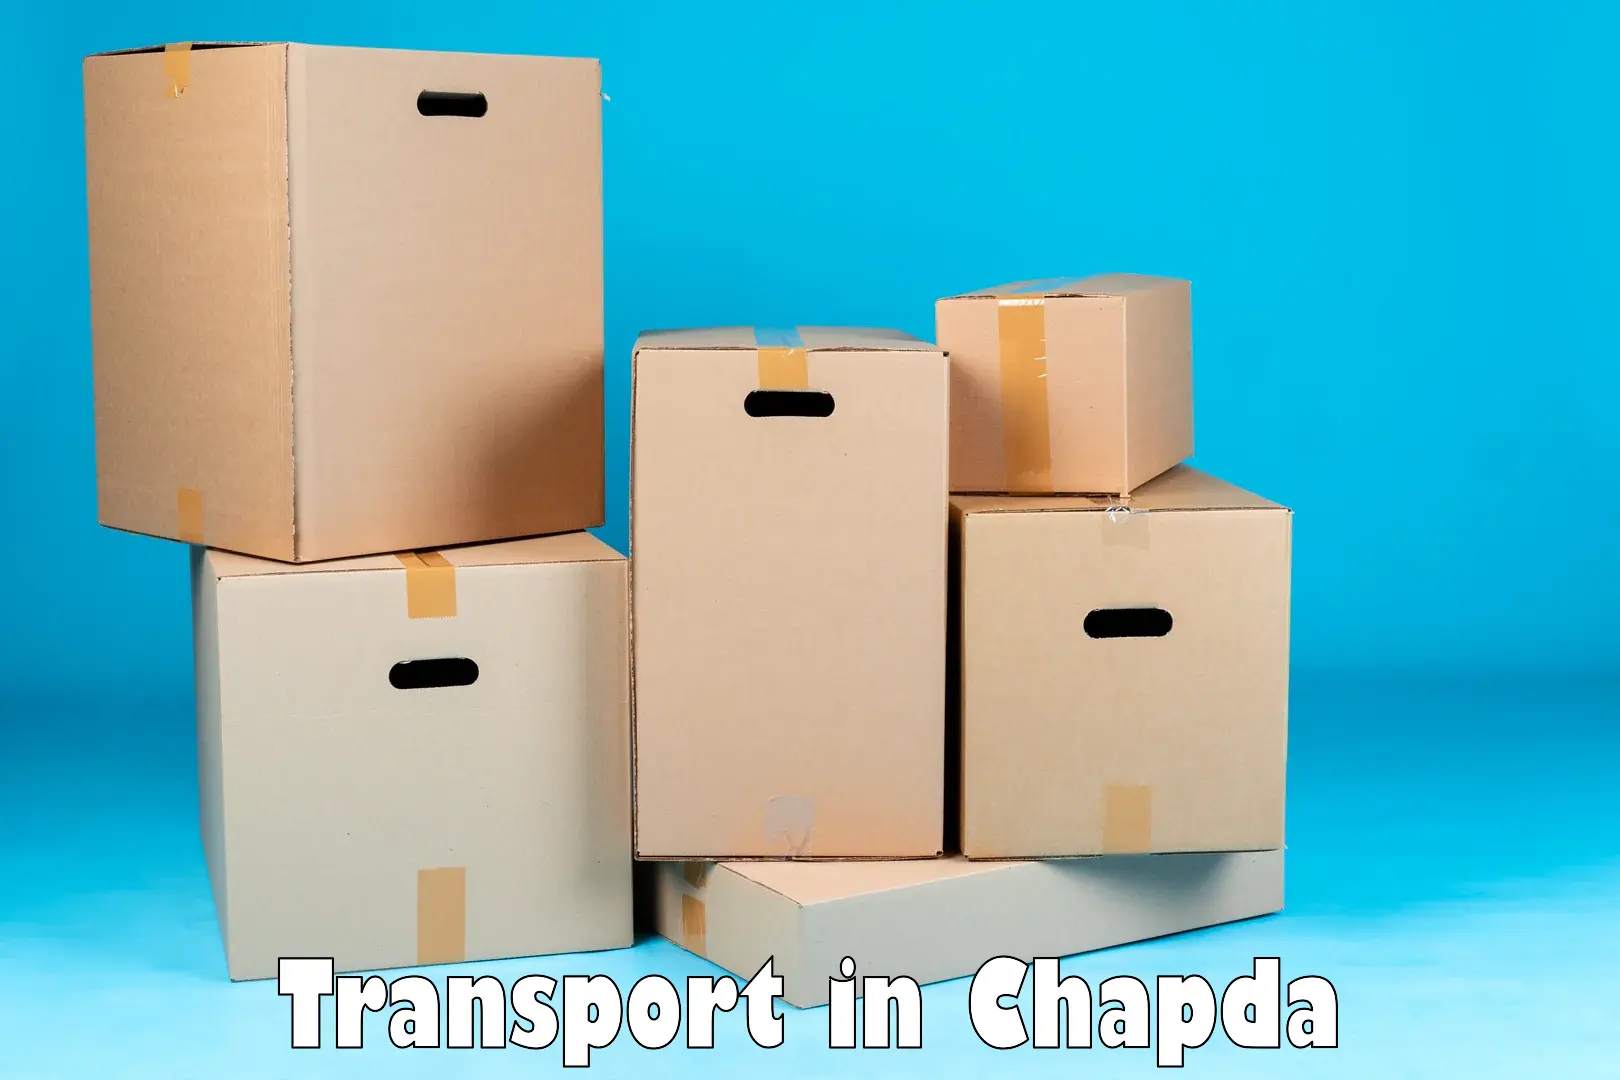 Cycle transportation service in Chapda